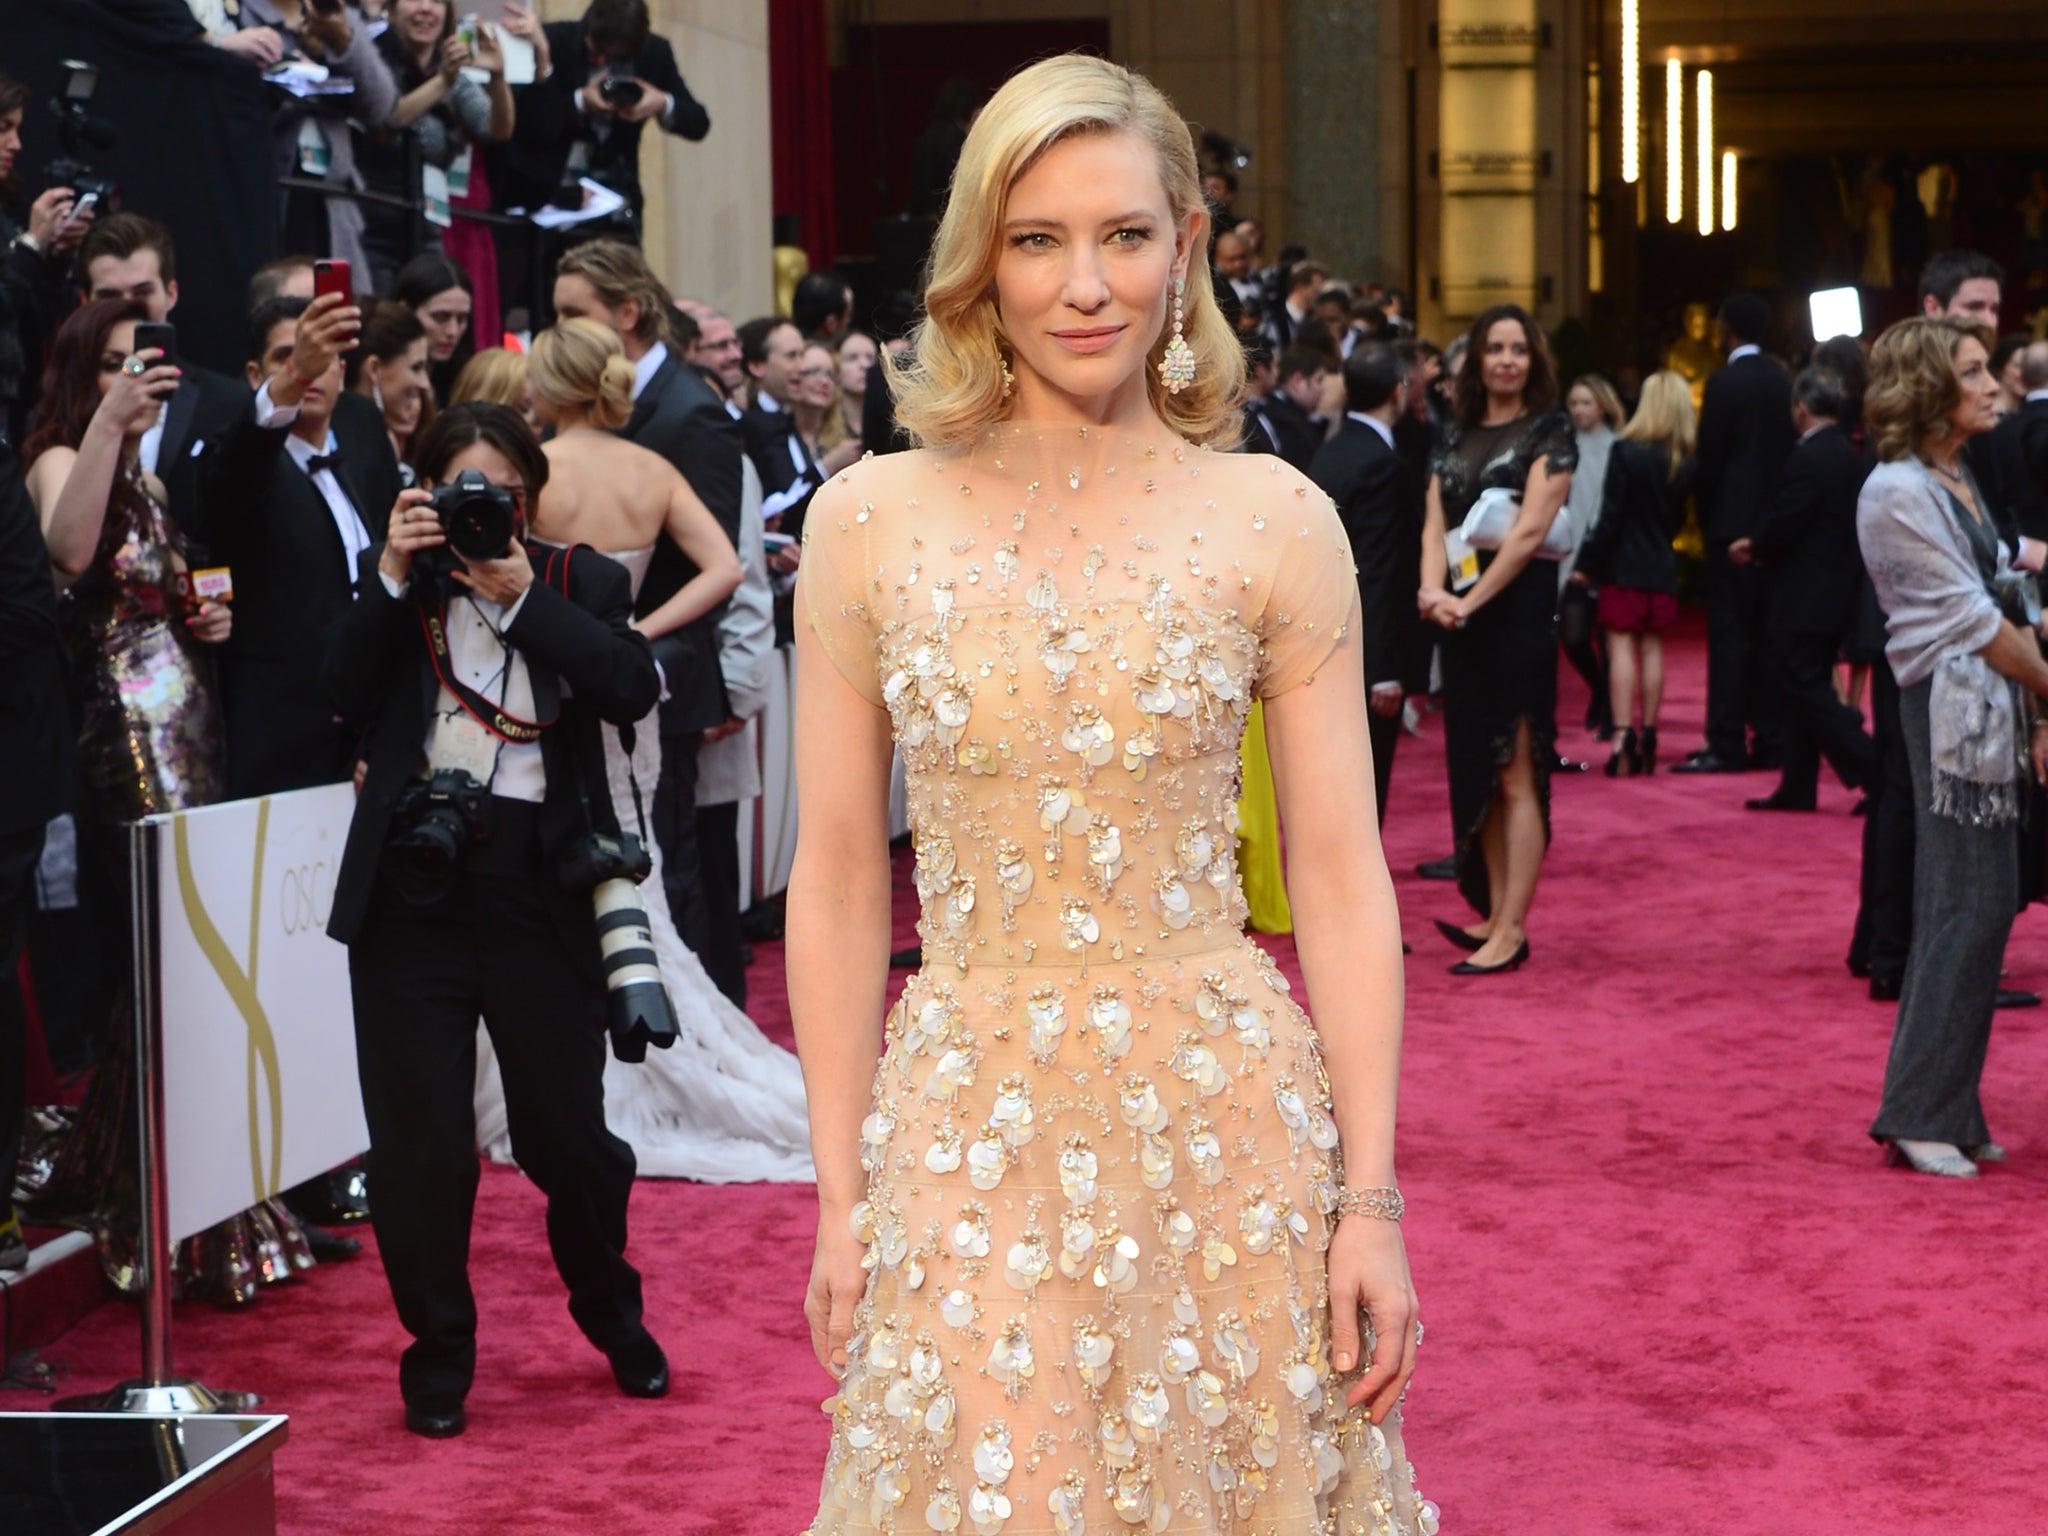 Cate Blanchett at the Oscars last year